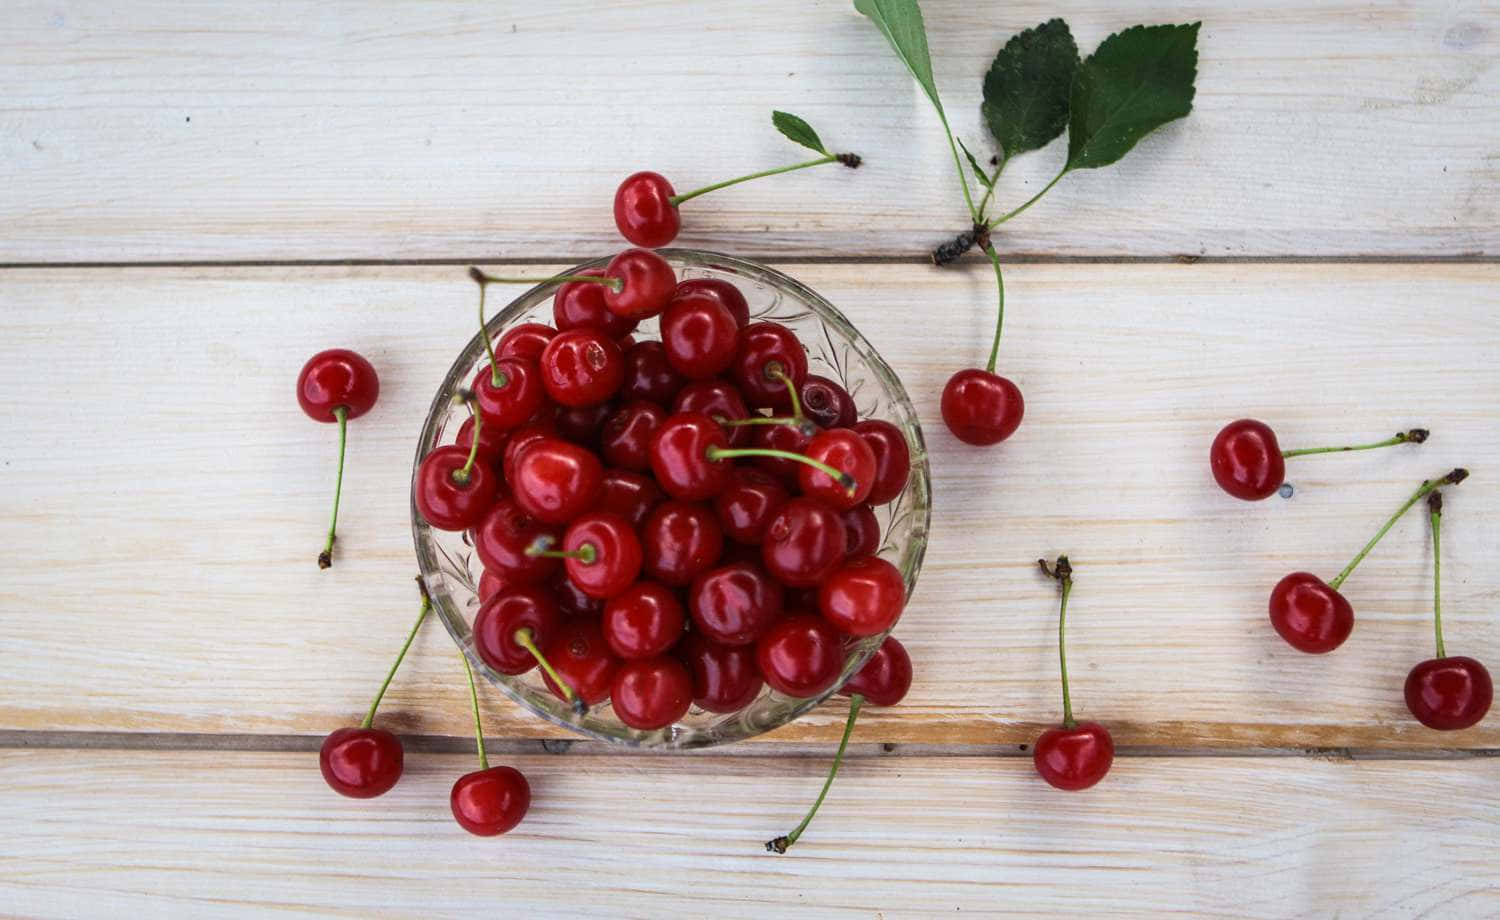 A cluster of fresh, juicy red cherries hanging from the branch Wallpaper